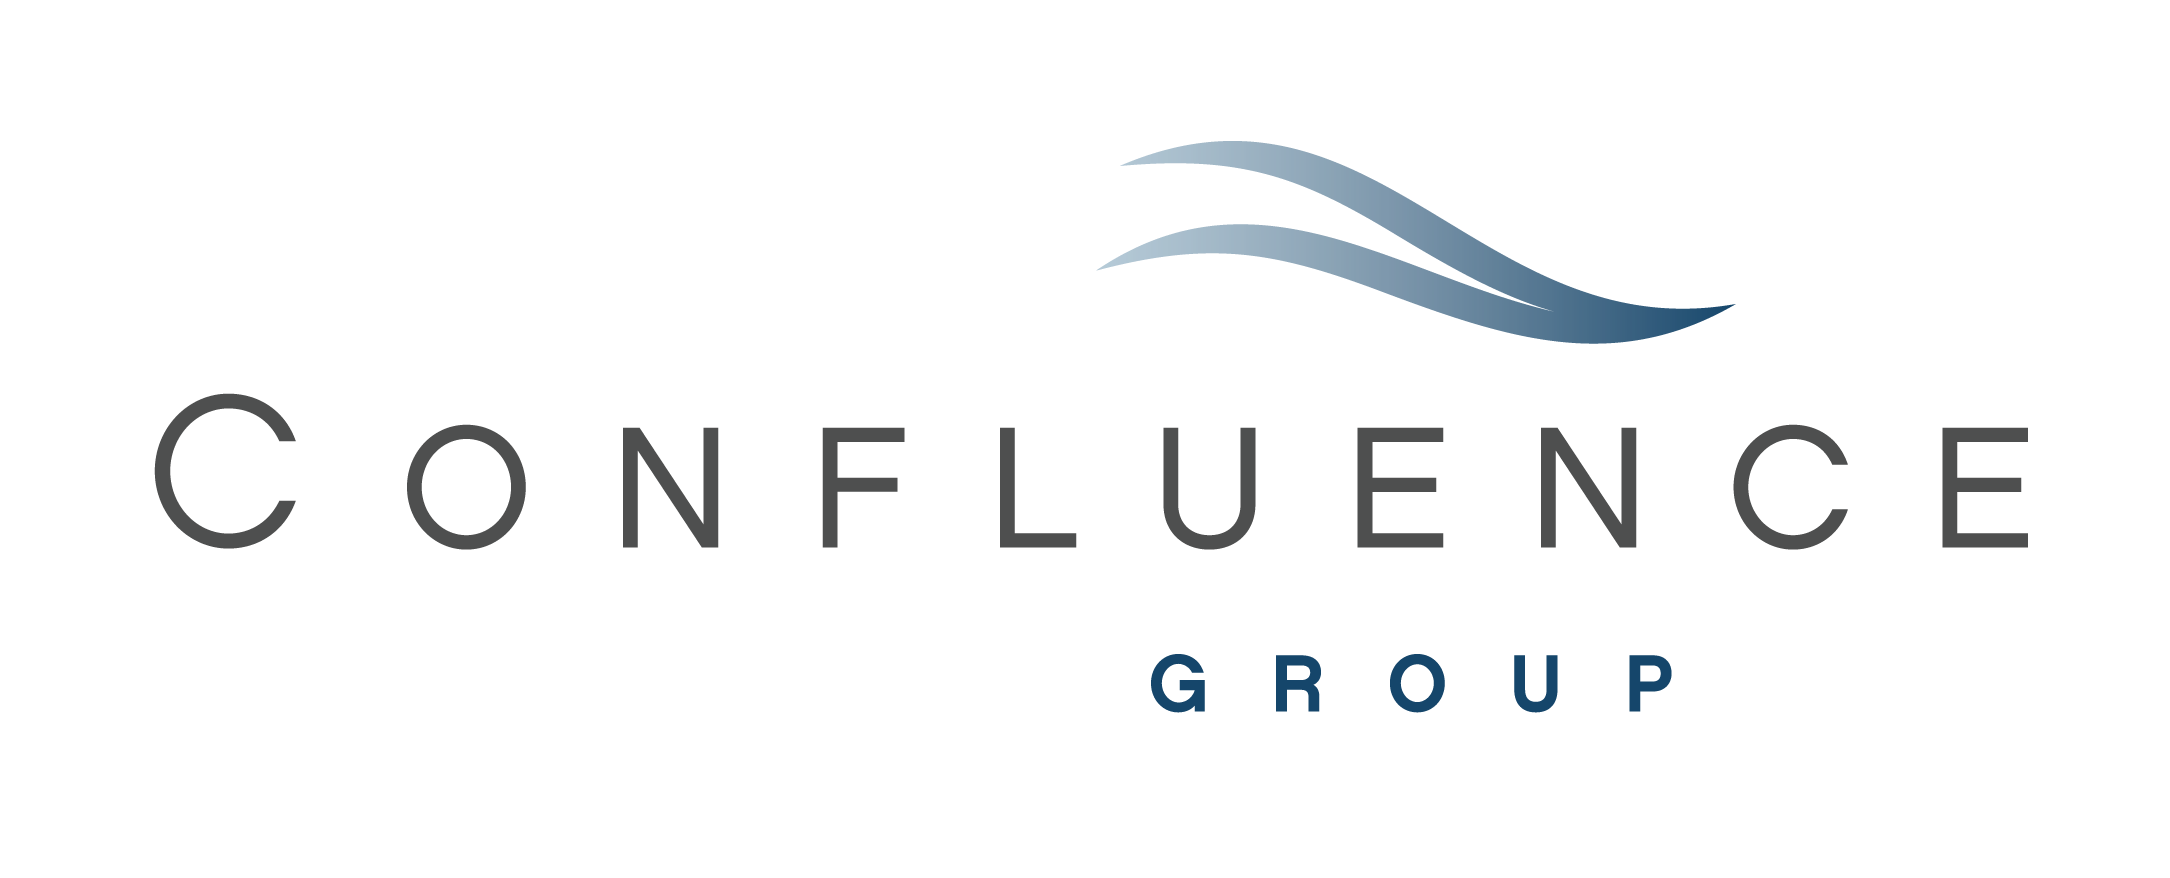 The Confluence Group